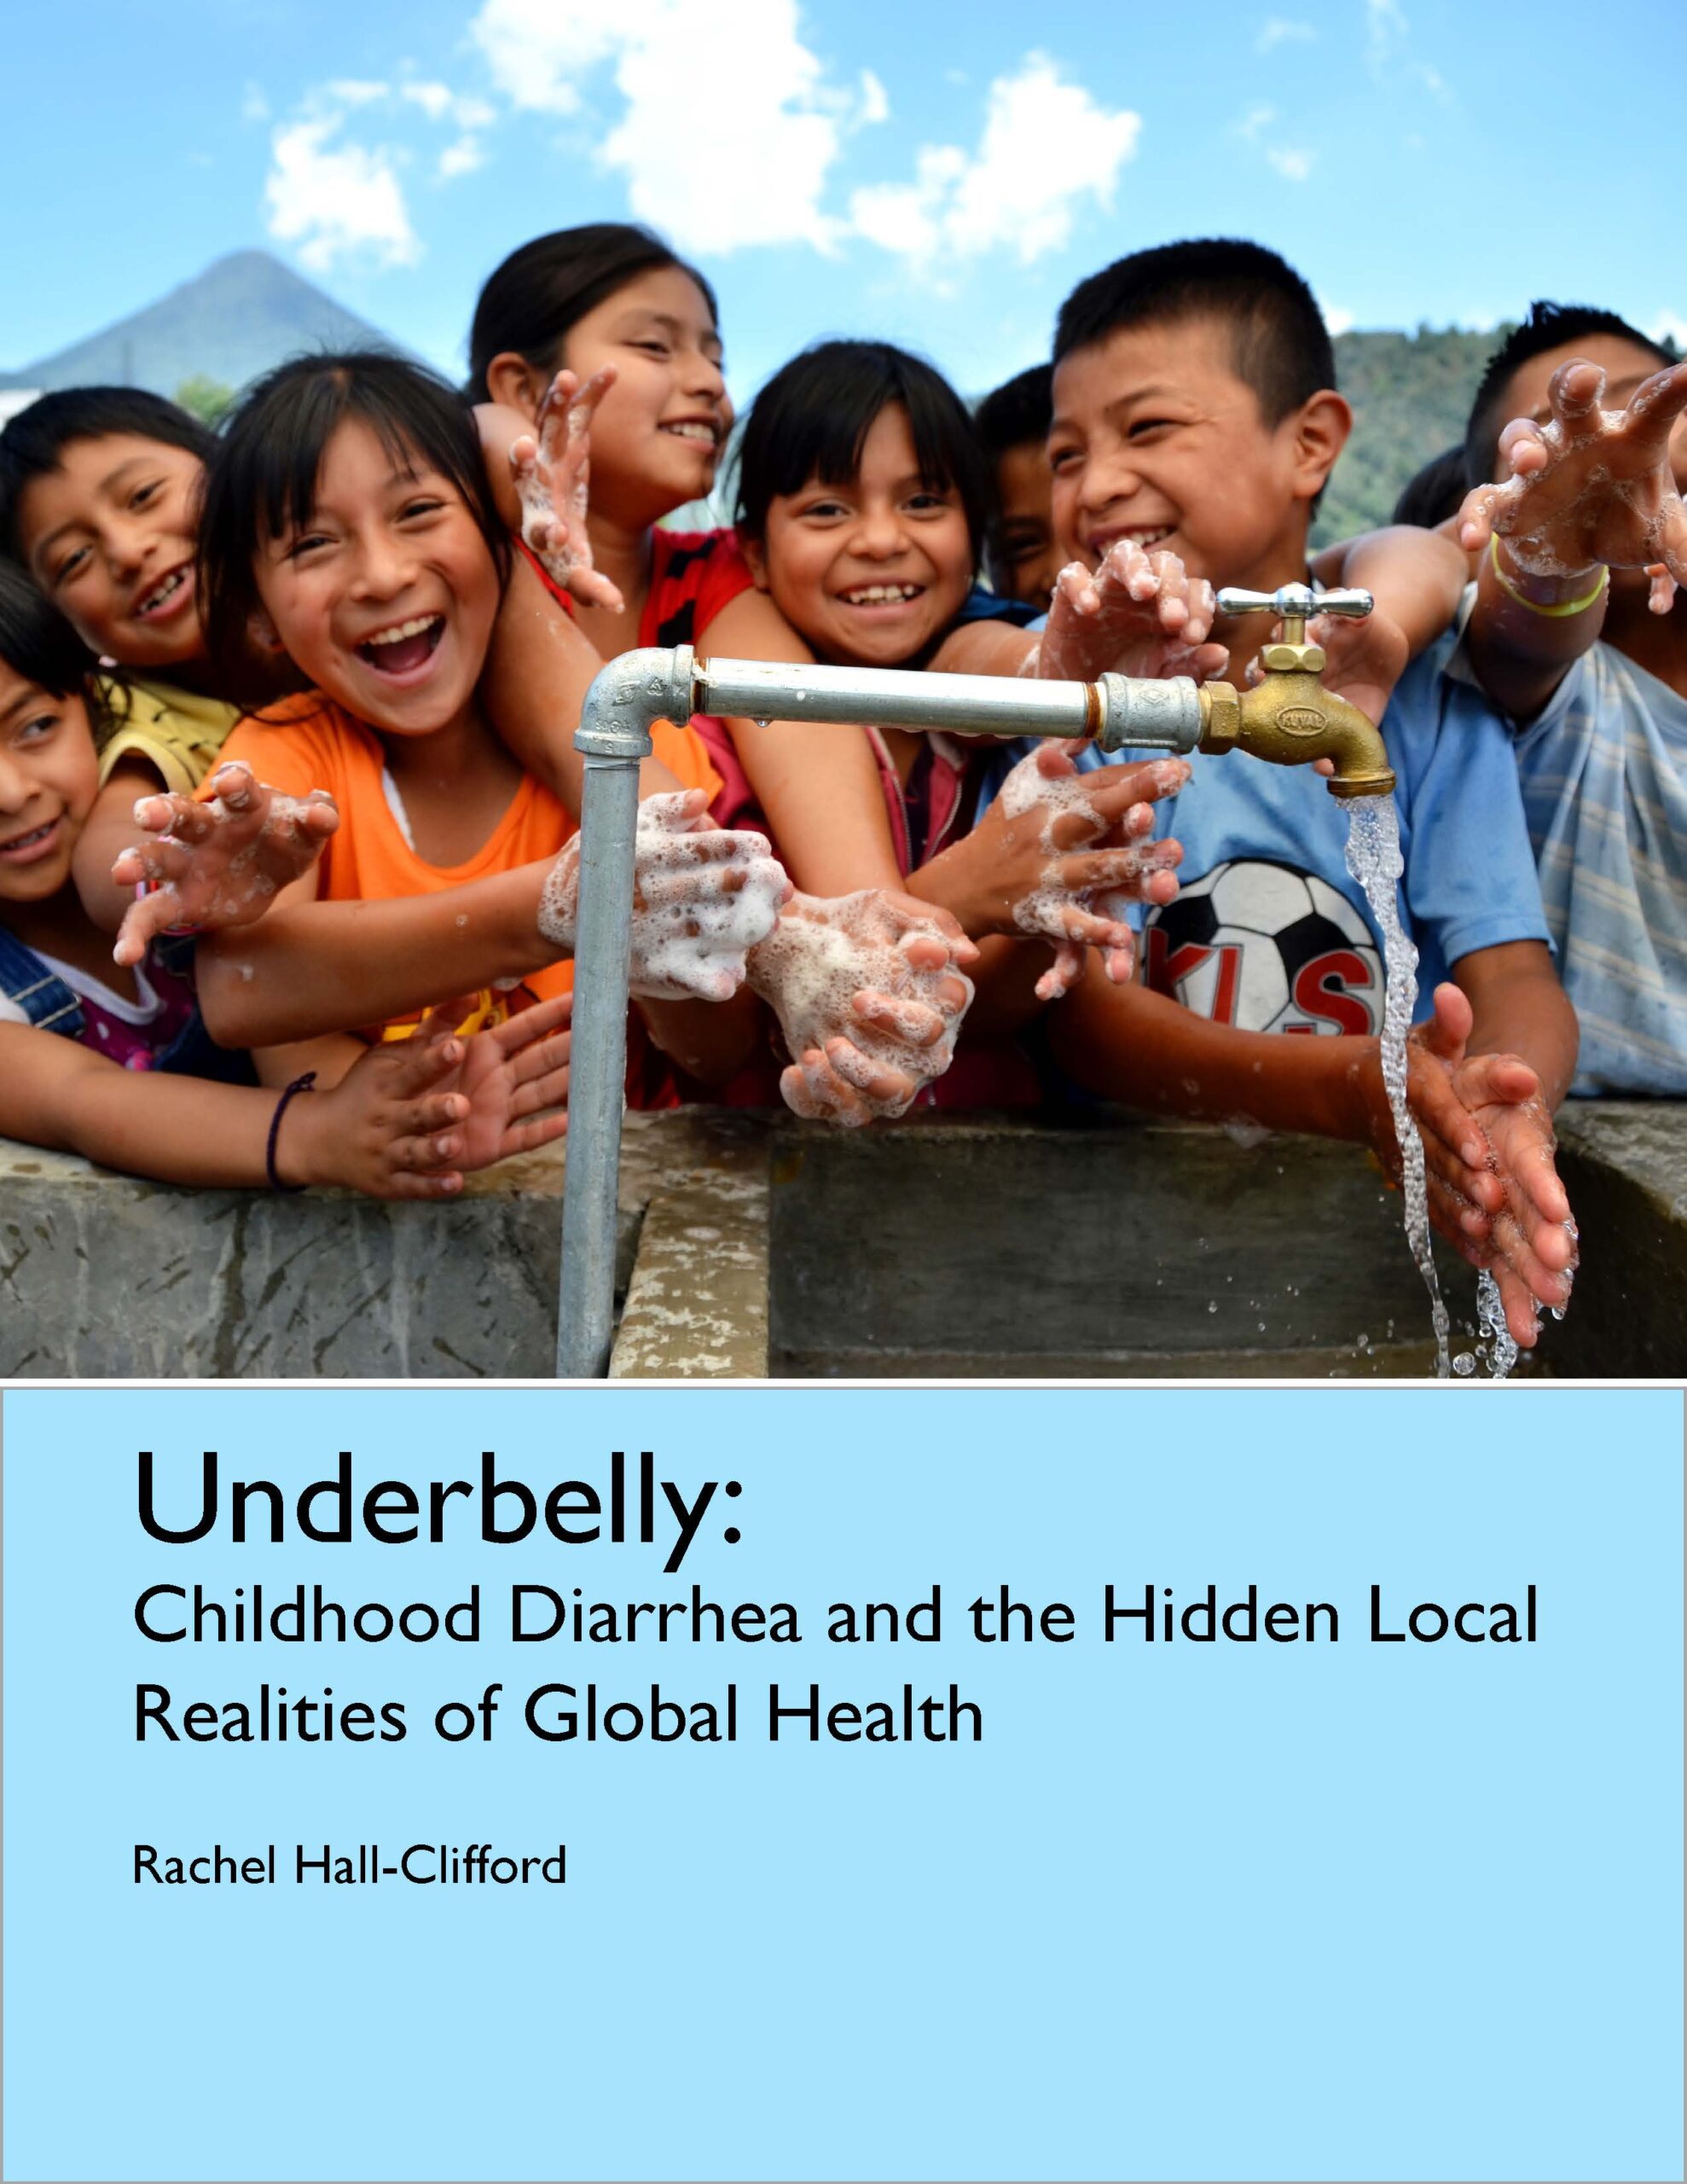 Underbelly: Childhood Diarrhea and the Hidden Local Realities of Global Health